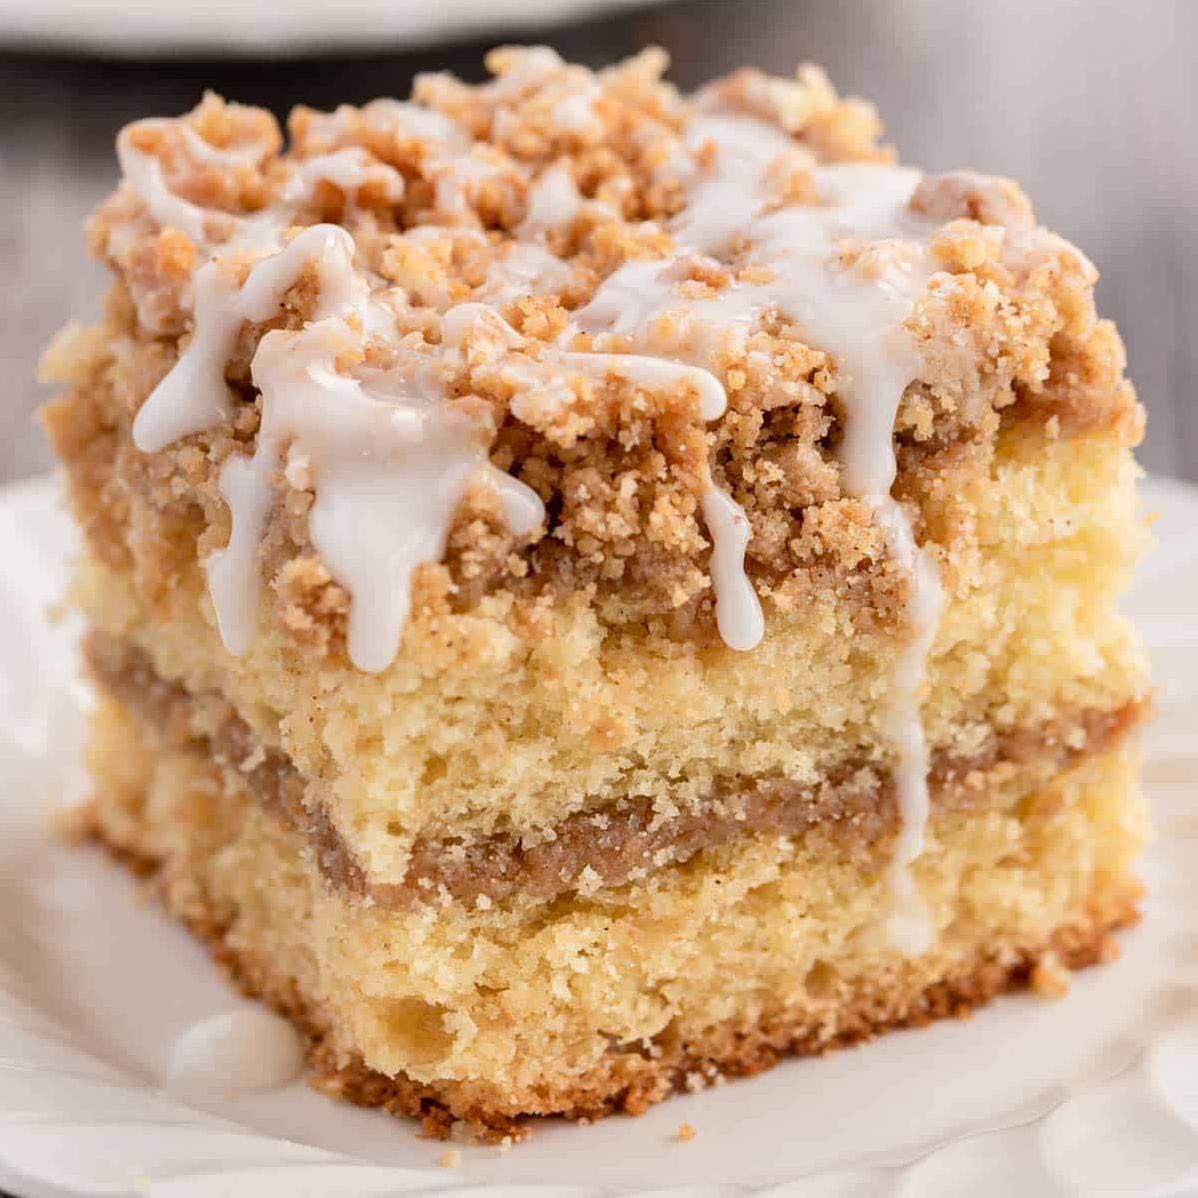  Indulge in a slice of warm and fluffy Cinnamon Sour Cream Coffee Cake.